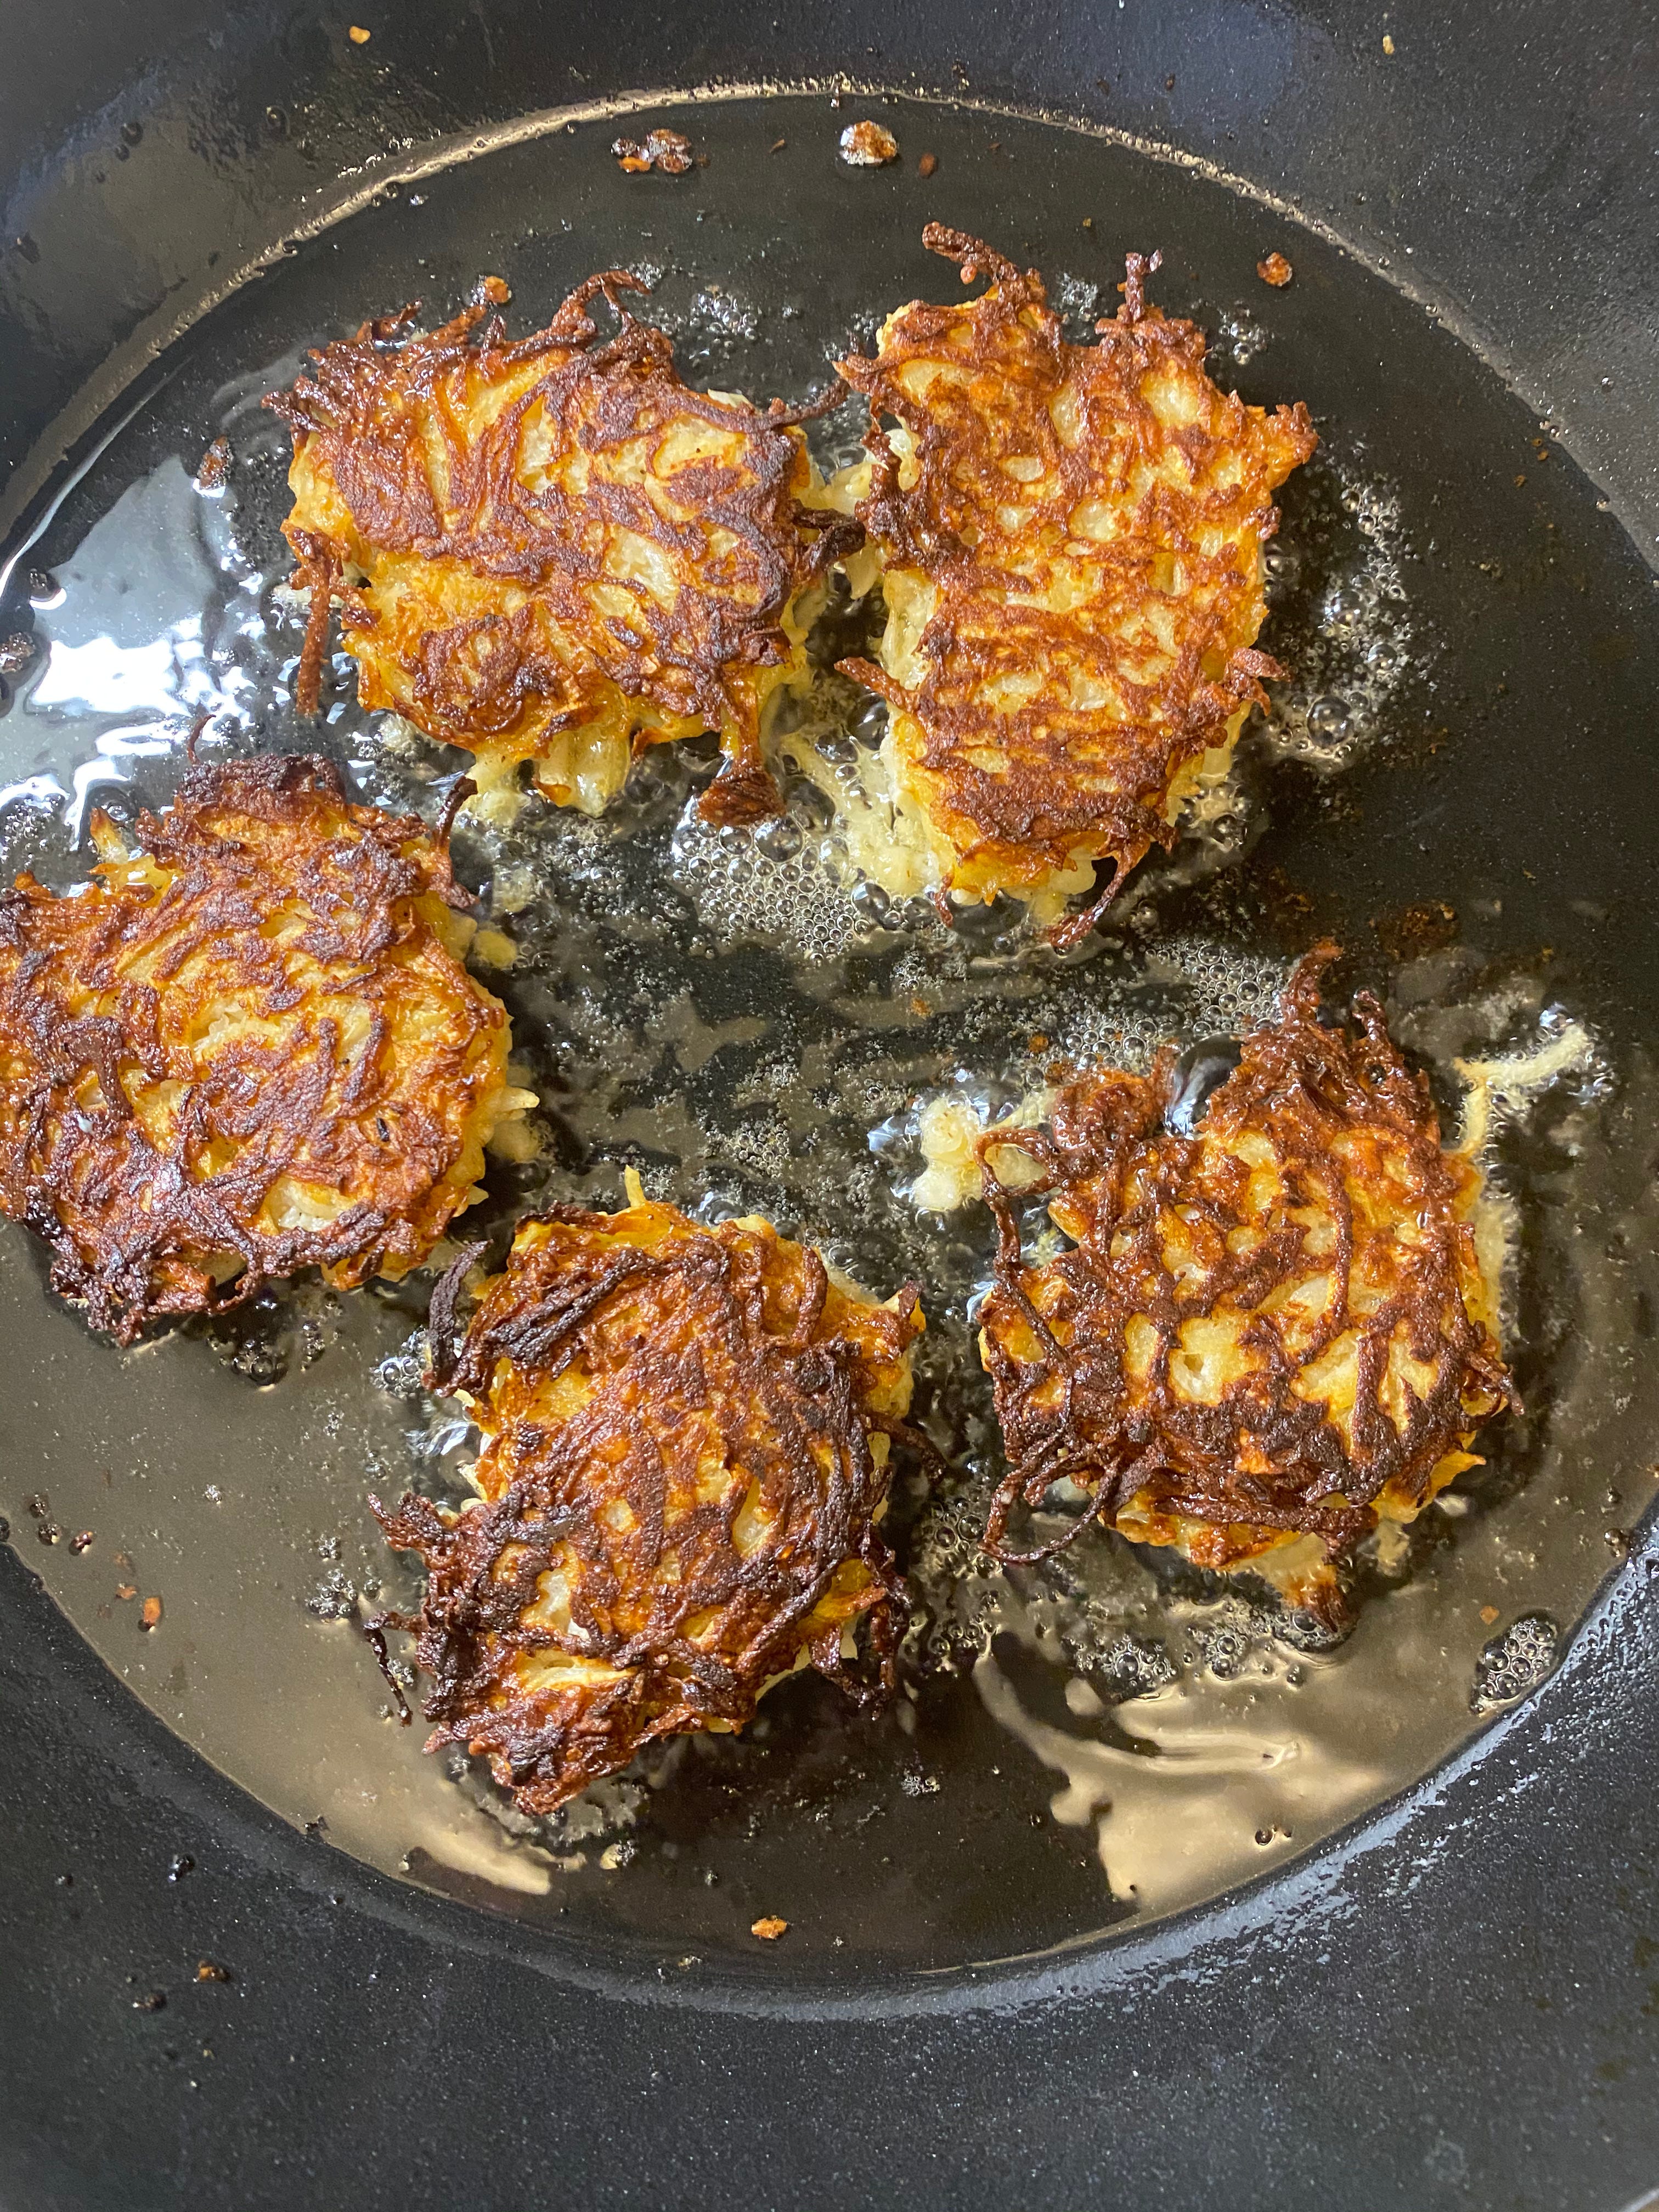 My wife deep fried some potato pancakes and I think it burned off